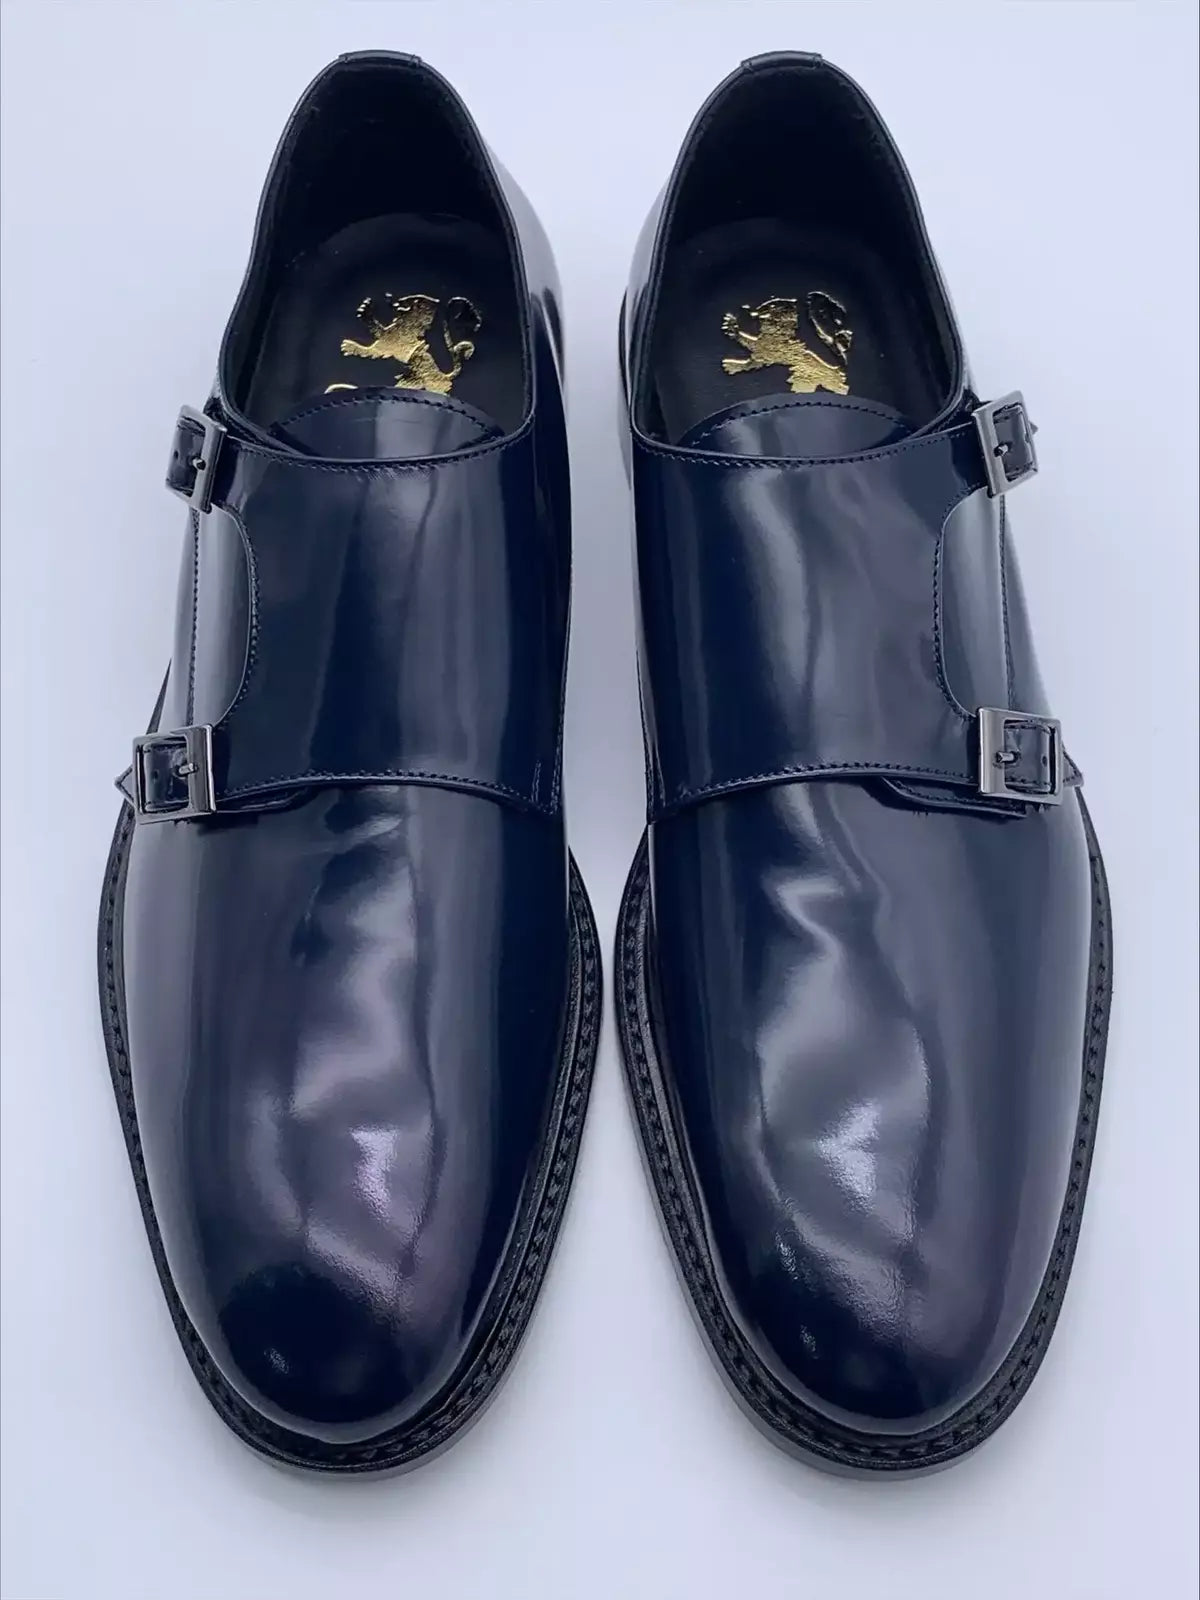 Monk Strap Shoe - Dark Blue Double buckle and smooth upper in polished abrasive calfskin- Bottom with BLAKE stitched light leather sole / Blake workmanship / Shiny calf leather / Black calfskin lining / Rounded shape / Lightweight leather bottom with non-slip insert sewn to BLAKE / Leather insole | Sartoria Dei Duchi - Atri